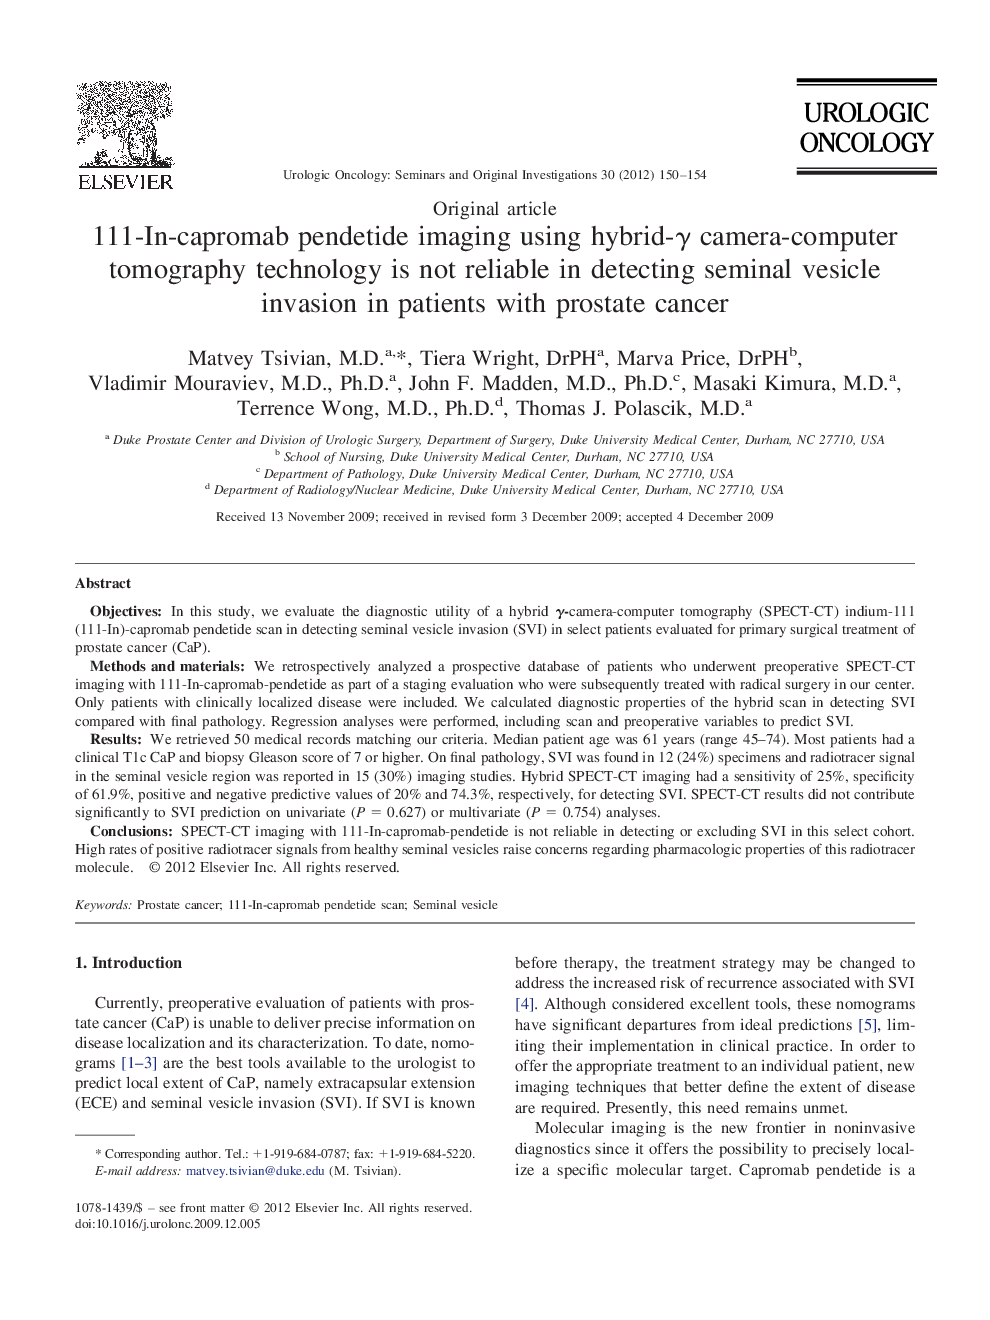 111-In-capromab pendetide imaging using hybrid-γ camera-computer tomography technology is not reliable in detecting seminal vesicle invasion in patients with prostate cancer